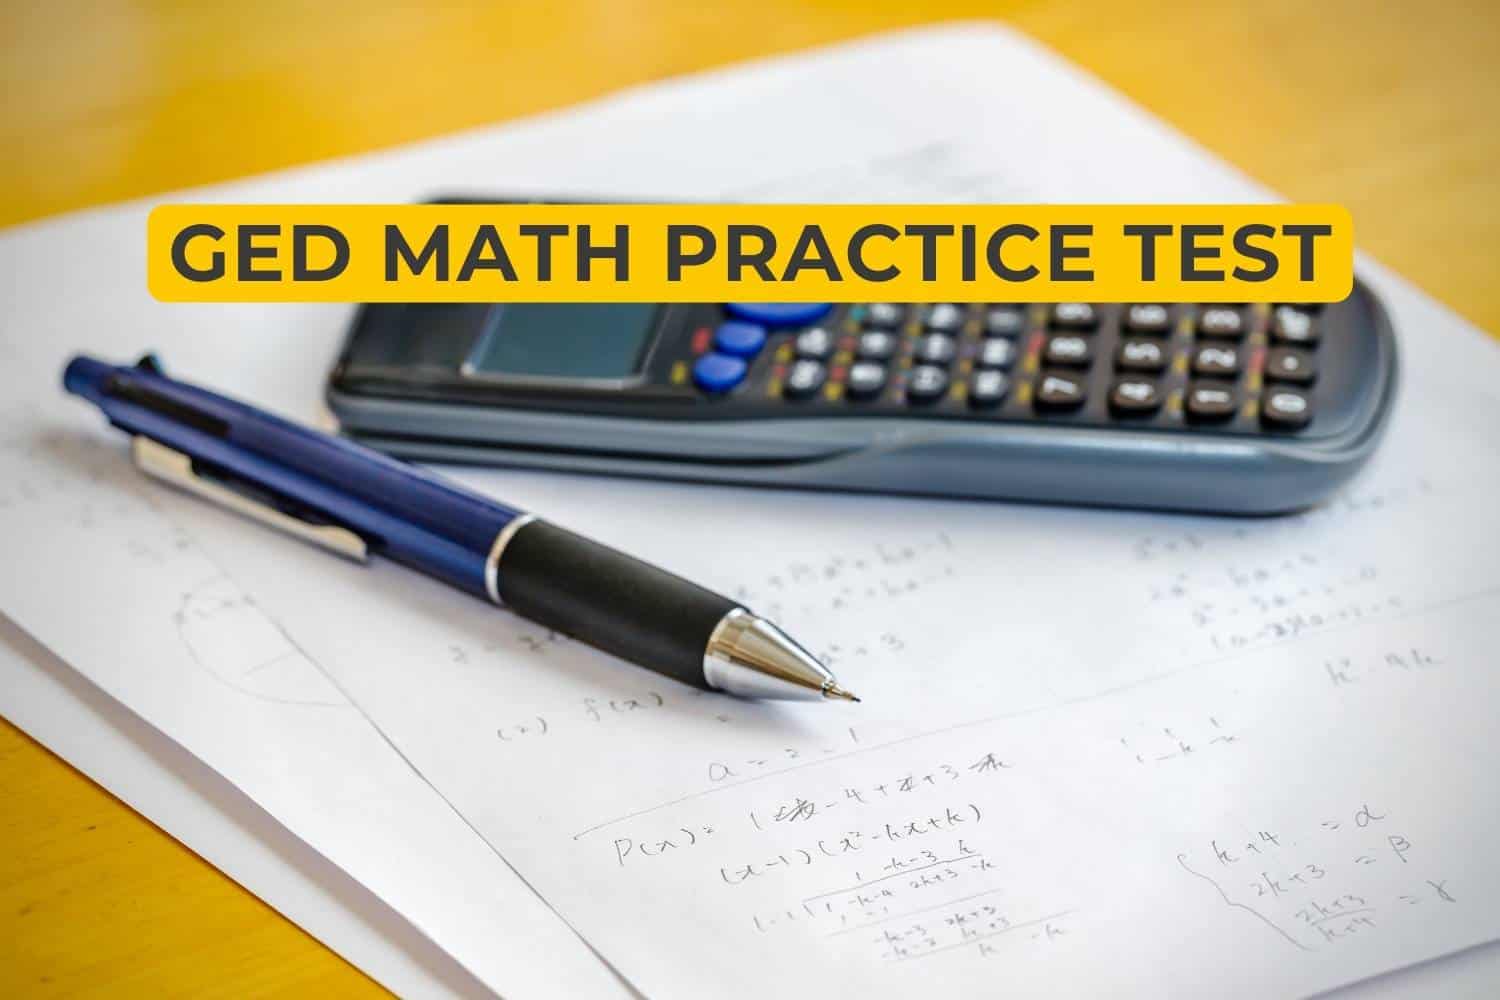 ged math practice test and answers pdf